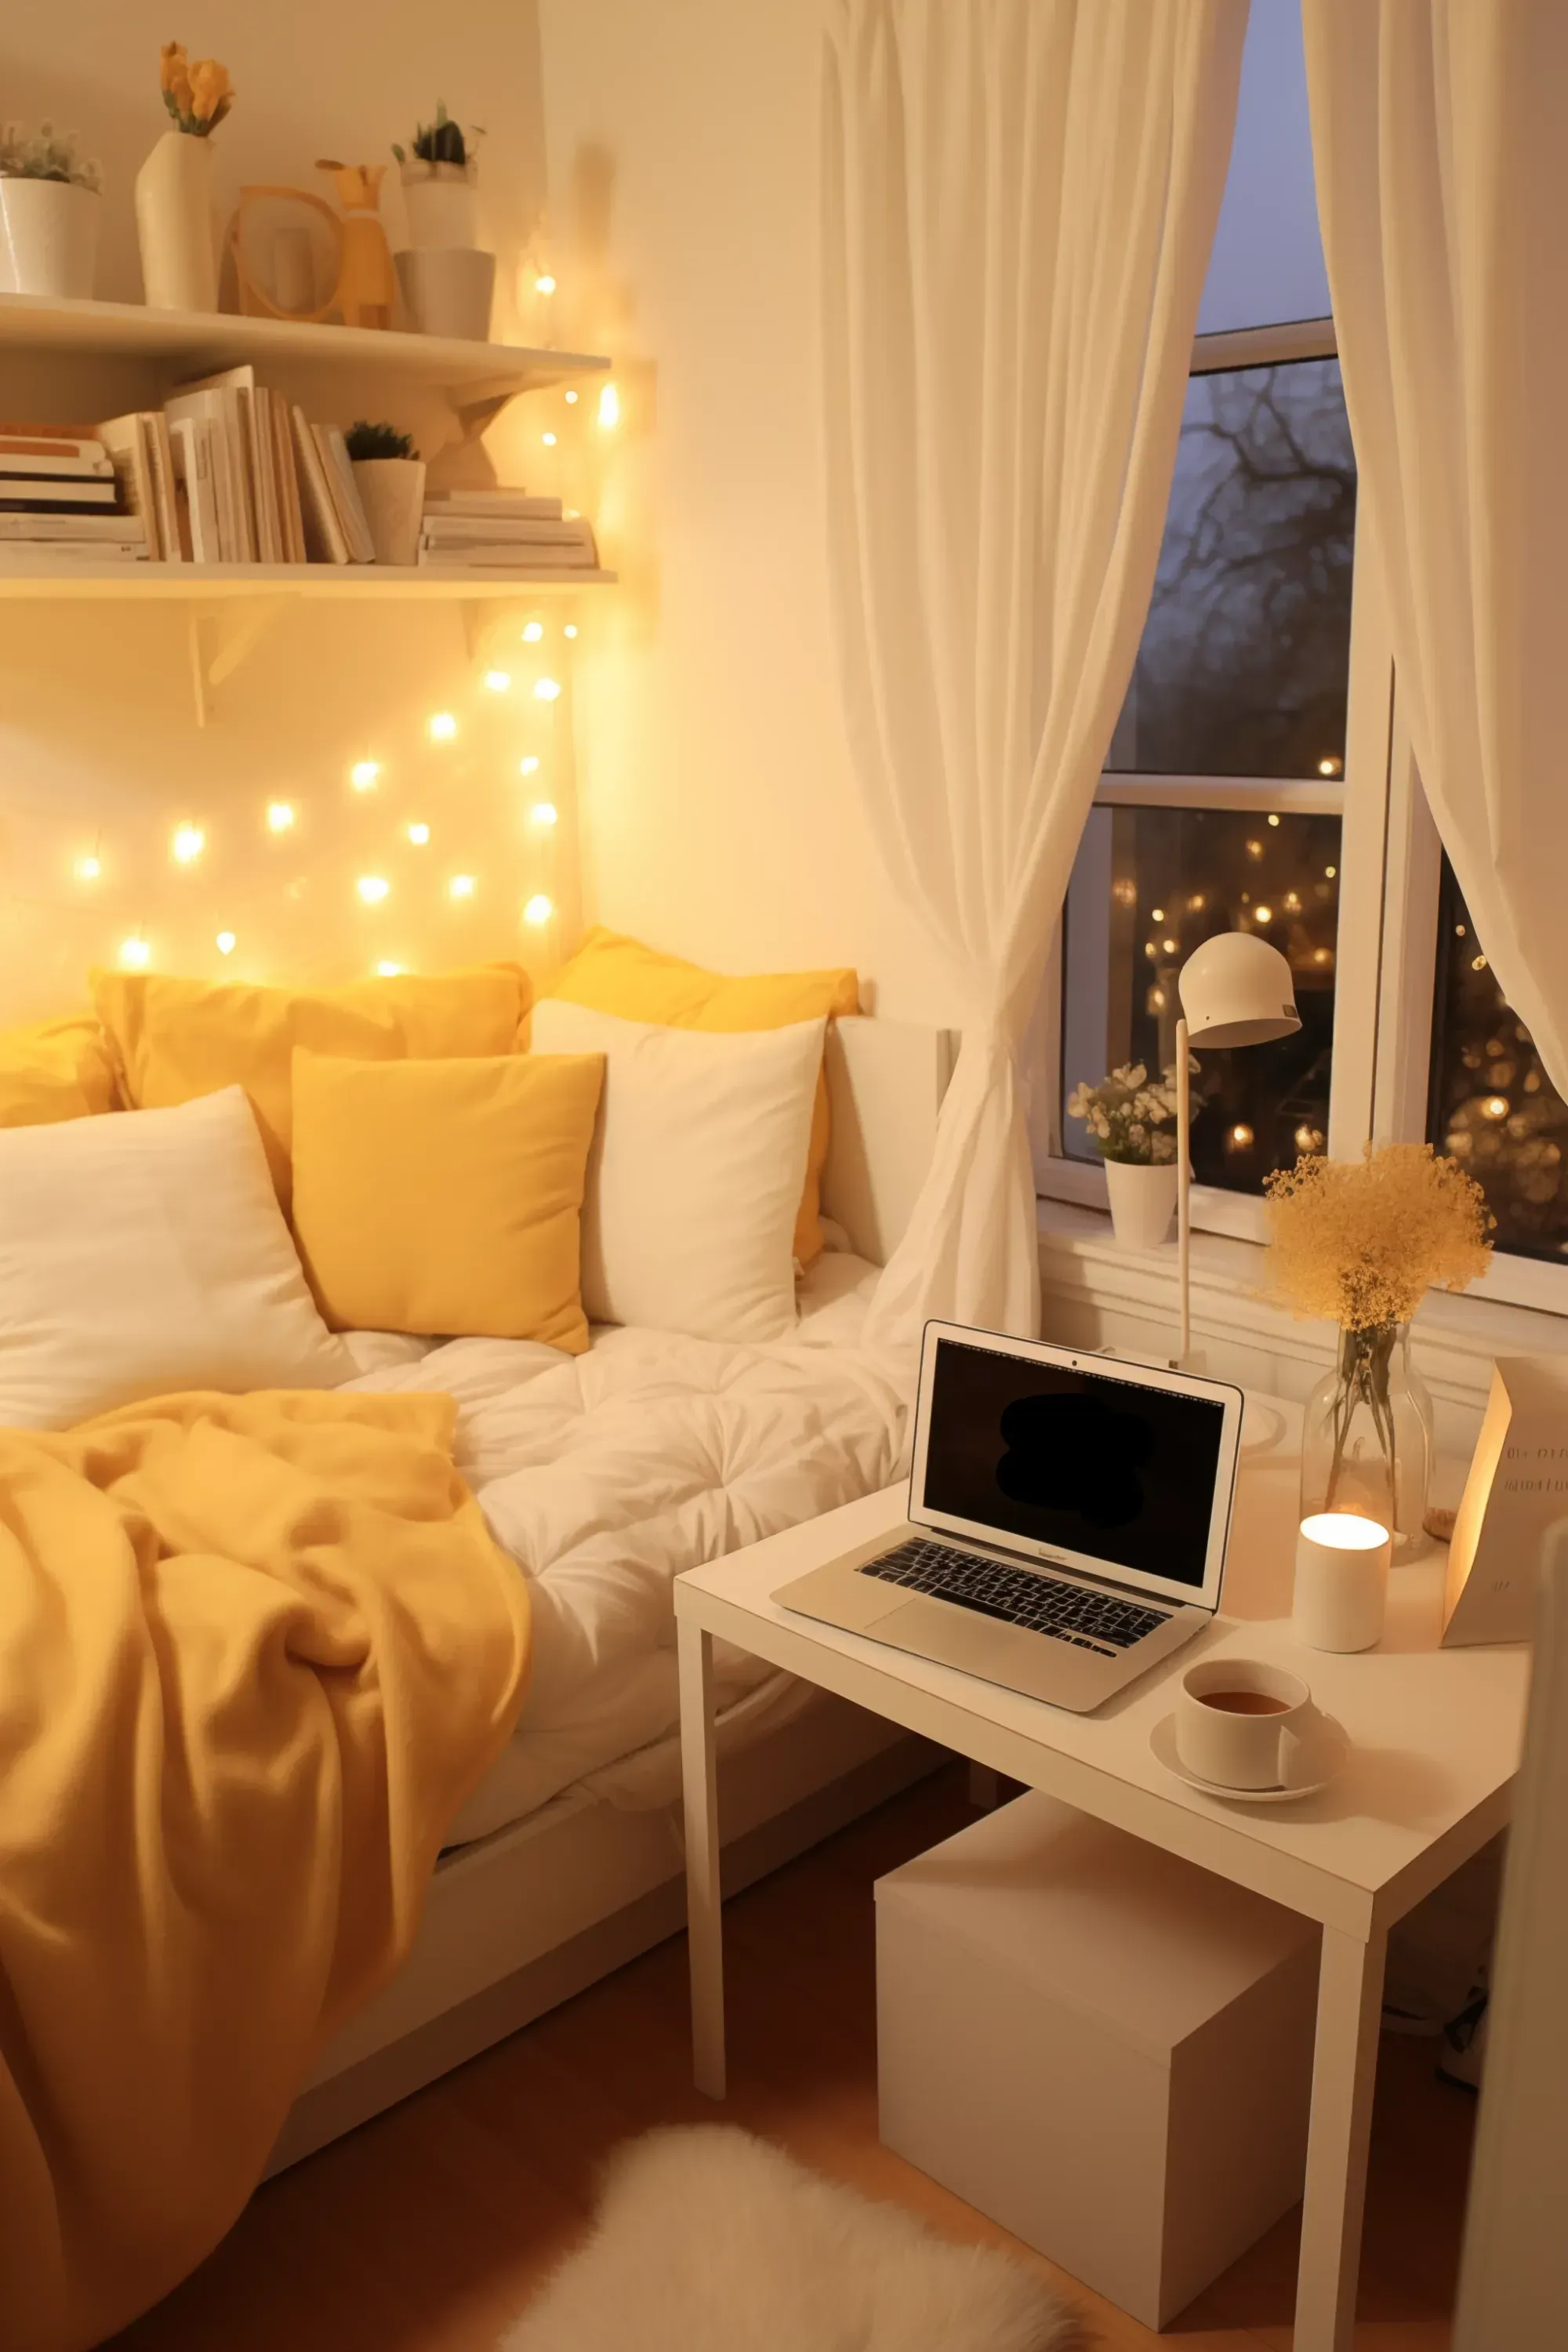 A yellow and white themed bedroom